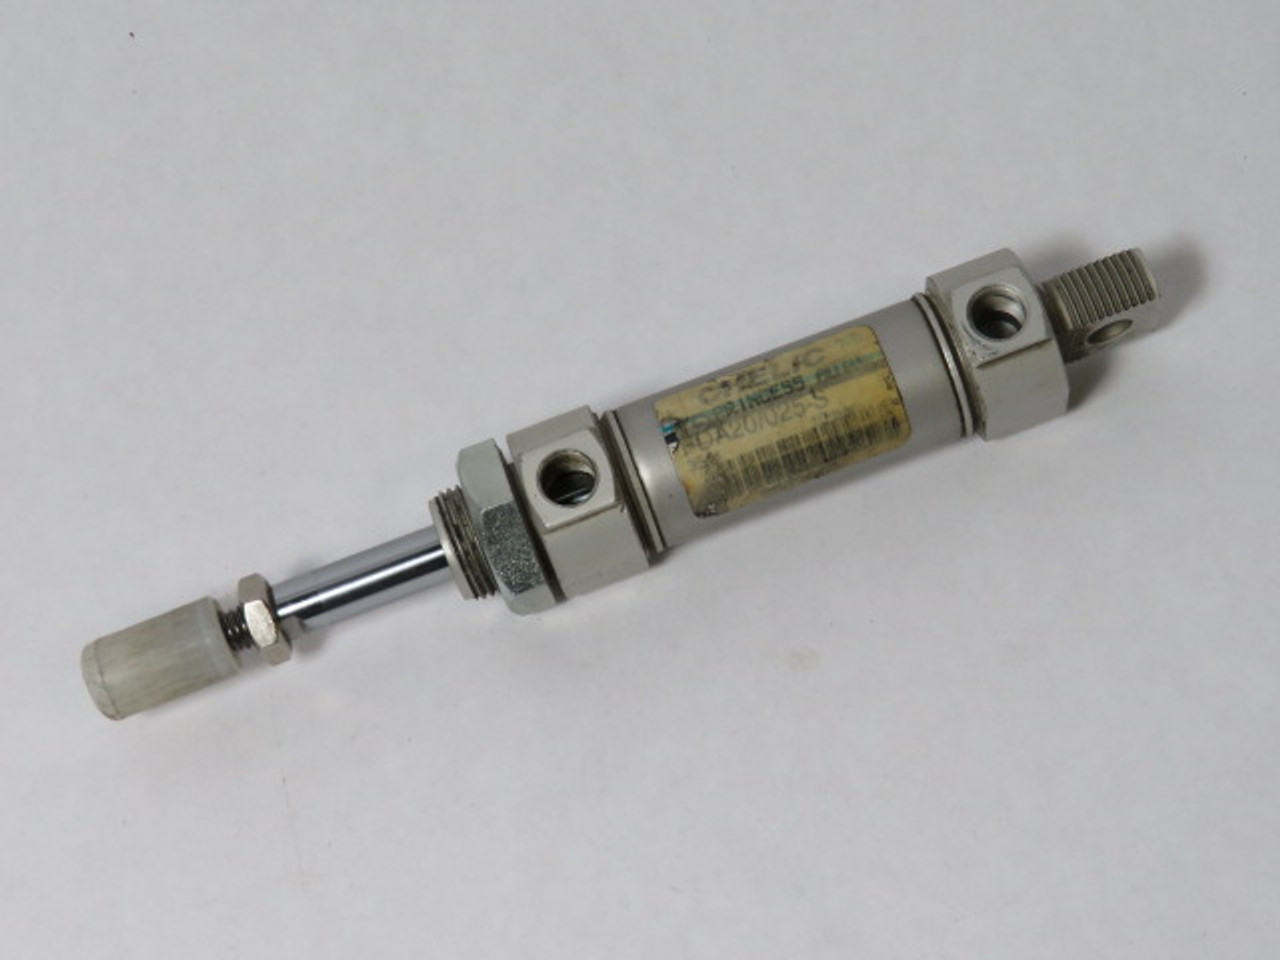 Chelie FDA20/025-S Pneumatic Air Cylinder 10 Bar USED